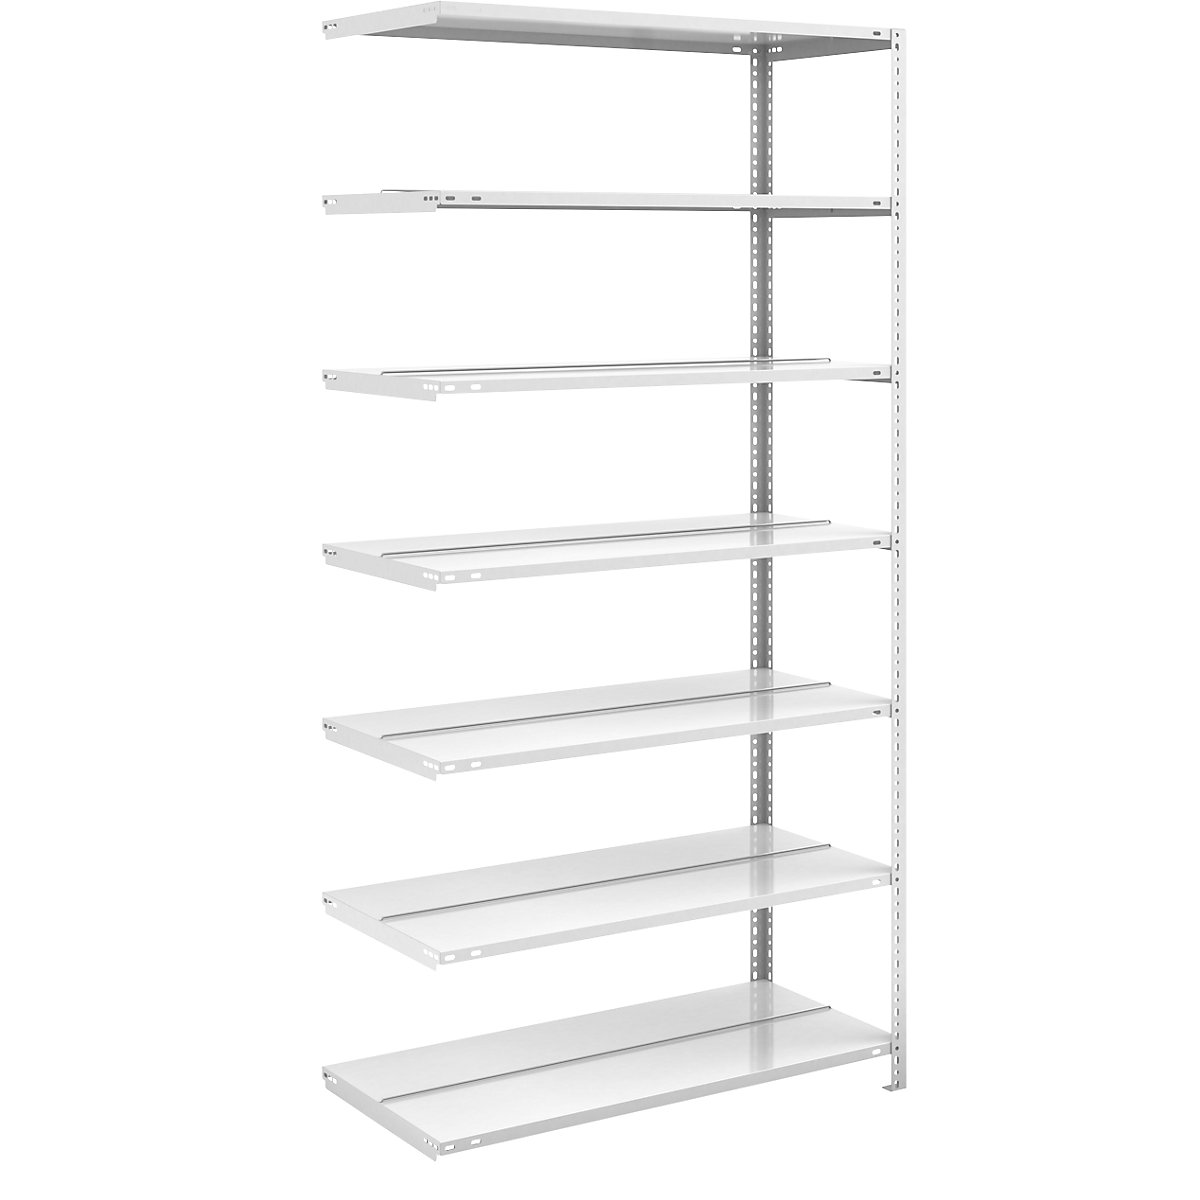 Bolt-together archive shelving, light grey RAL 7035 – hofe, shelf height 2200 mm, double sided, extension shelf, width x depth 1000 x 600 mm-7